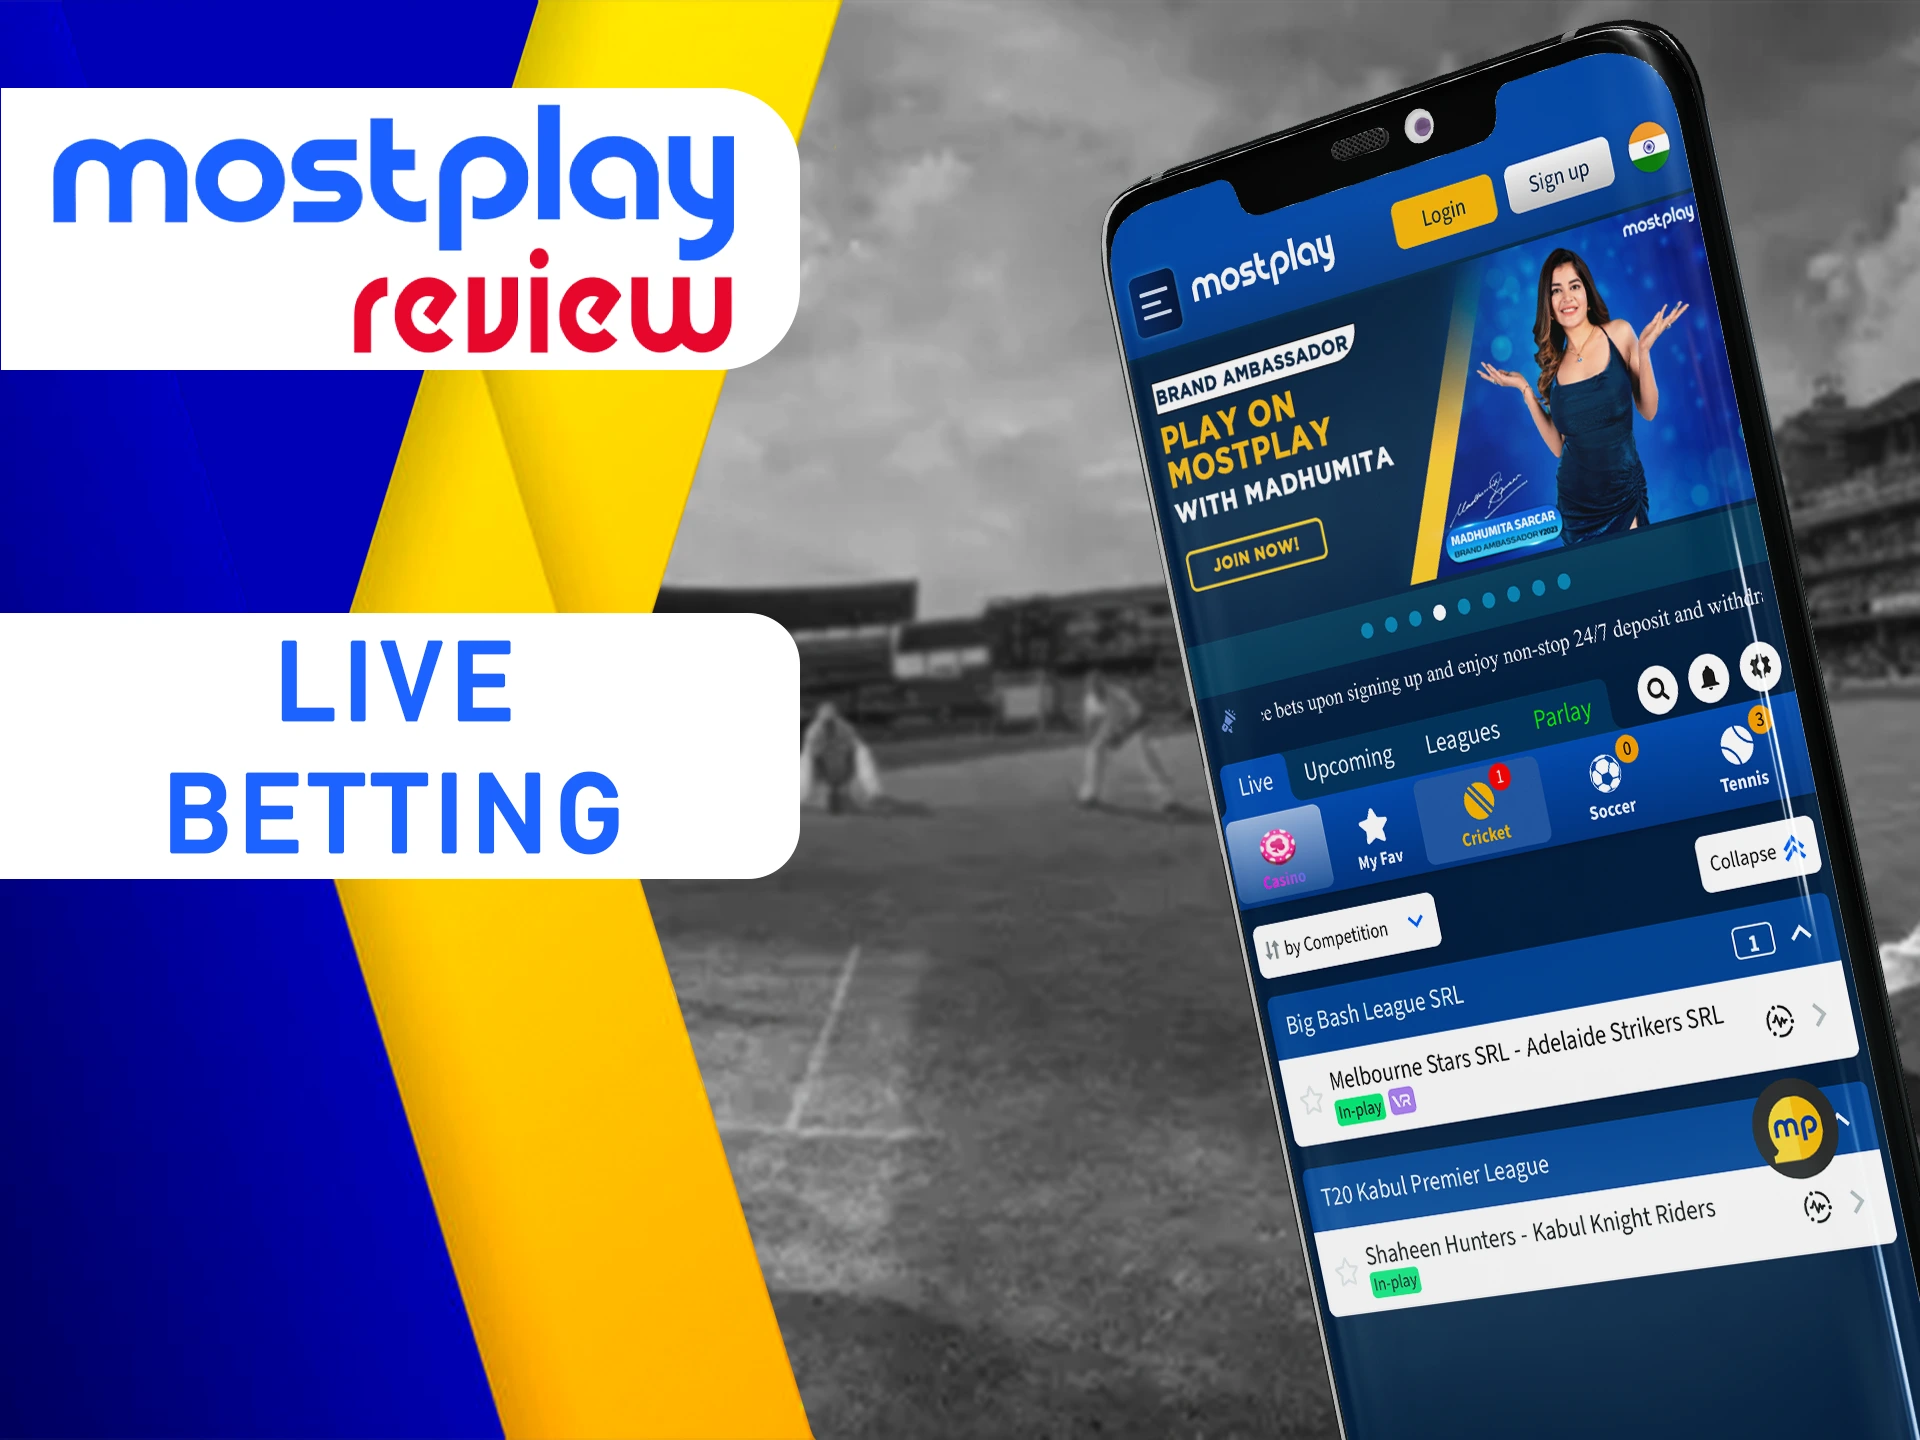 Watch and bet on sports in a live format at Mostplay.